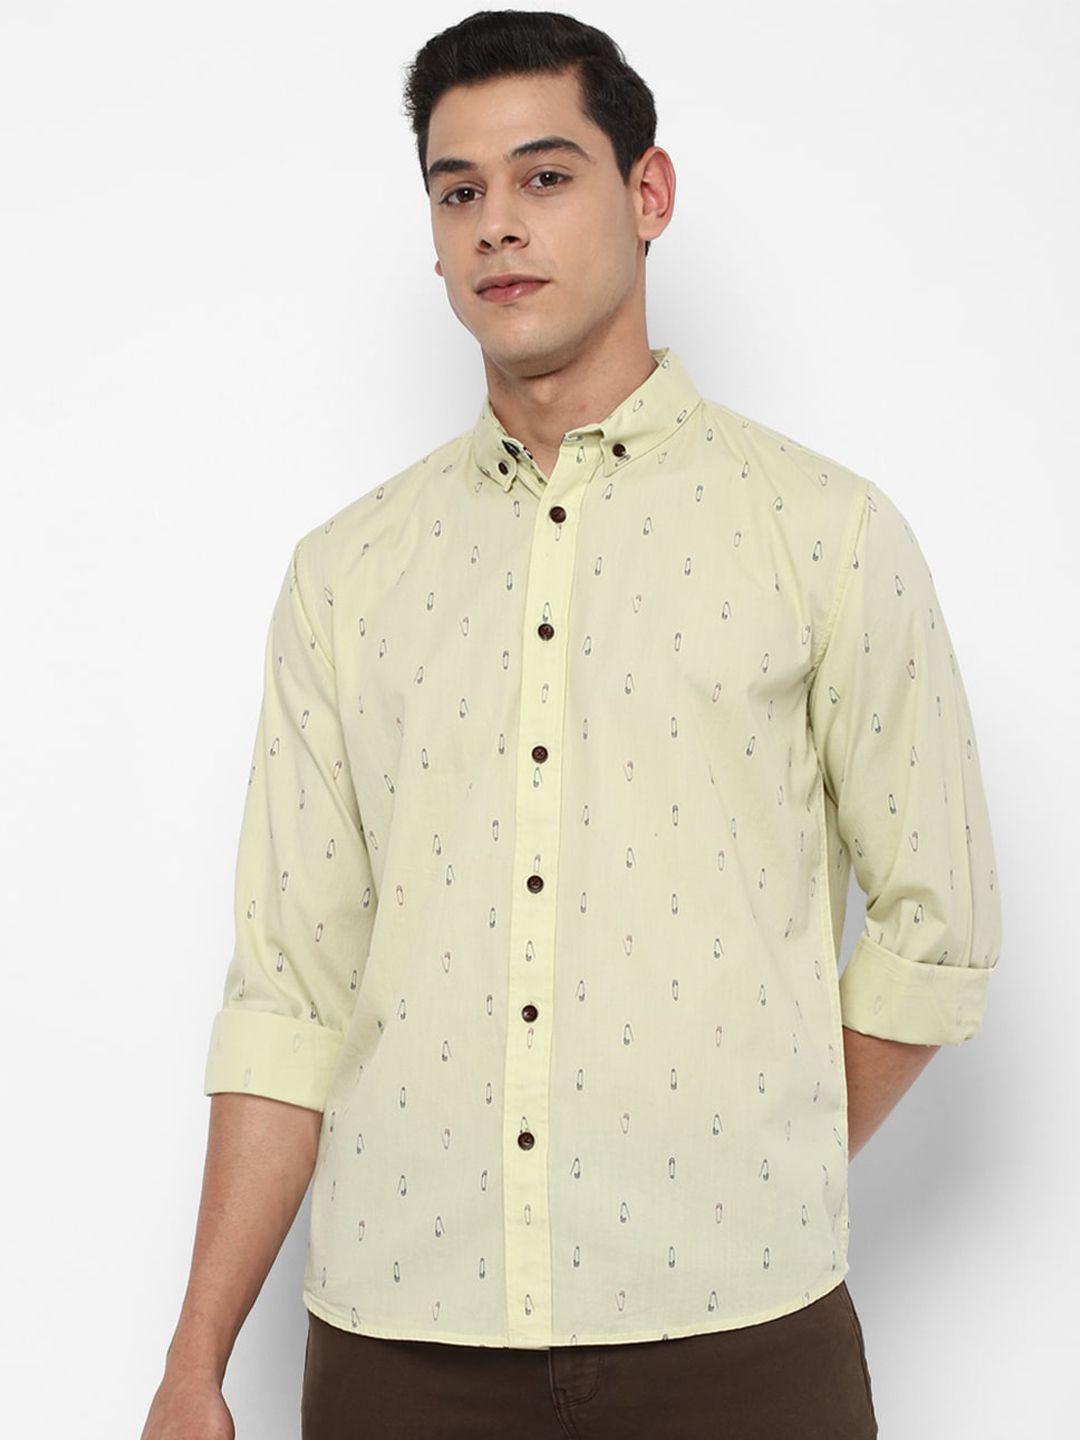 forever 21 men yellow & black printed pure cotton casual shirt